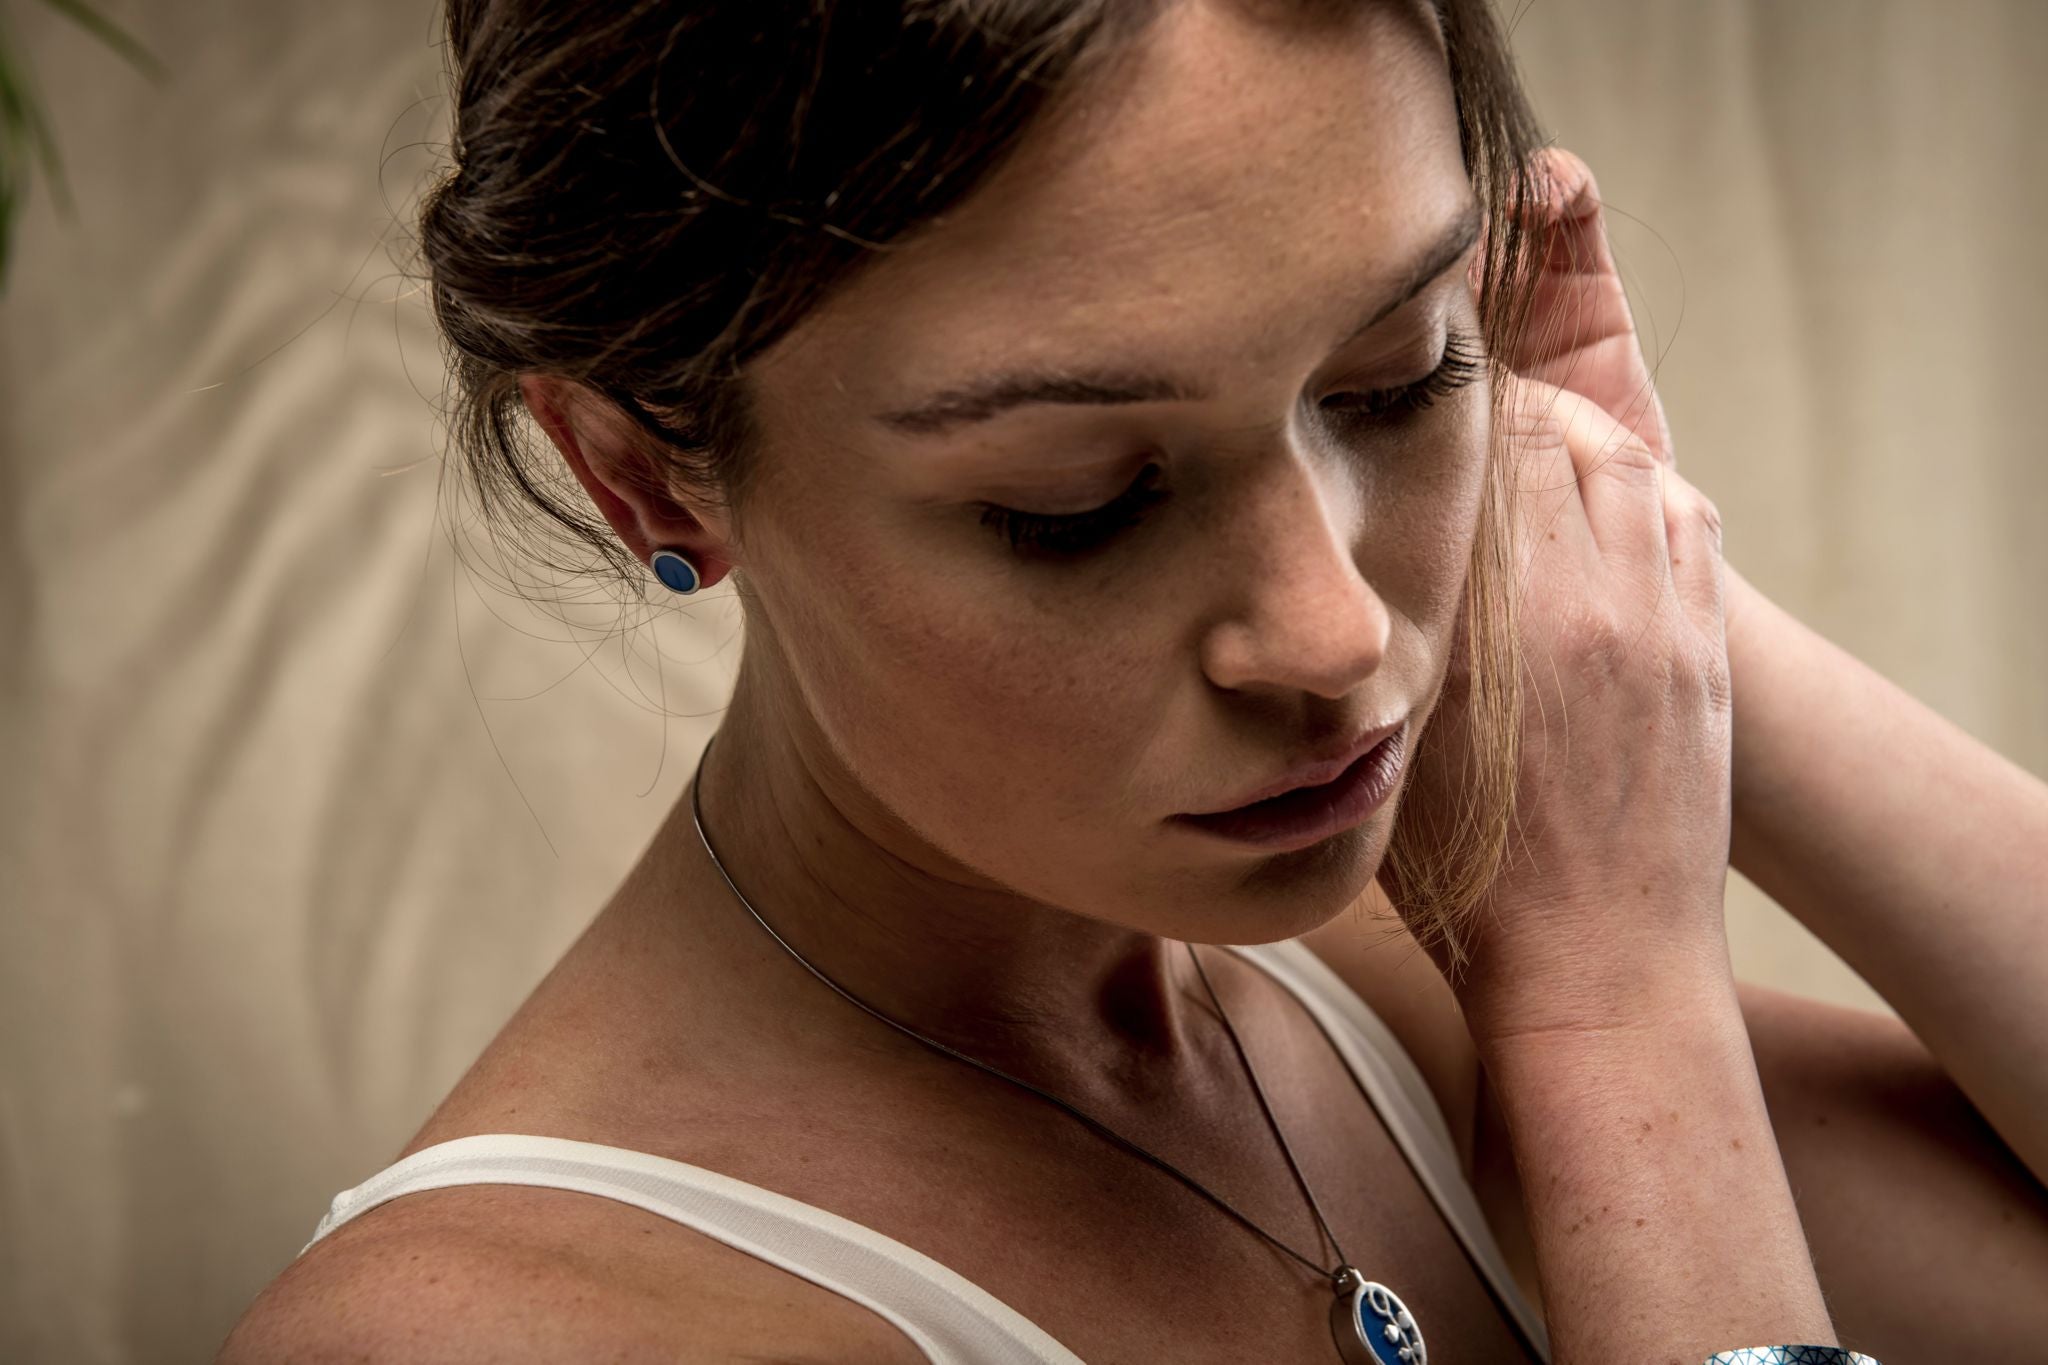 Model wearing matching blue earrings and necklace.